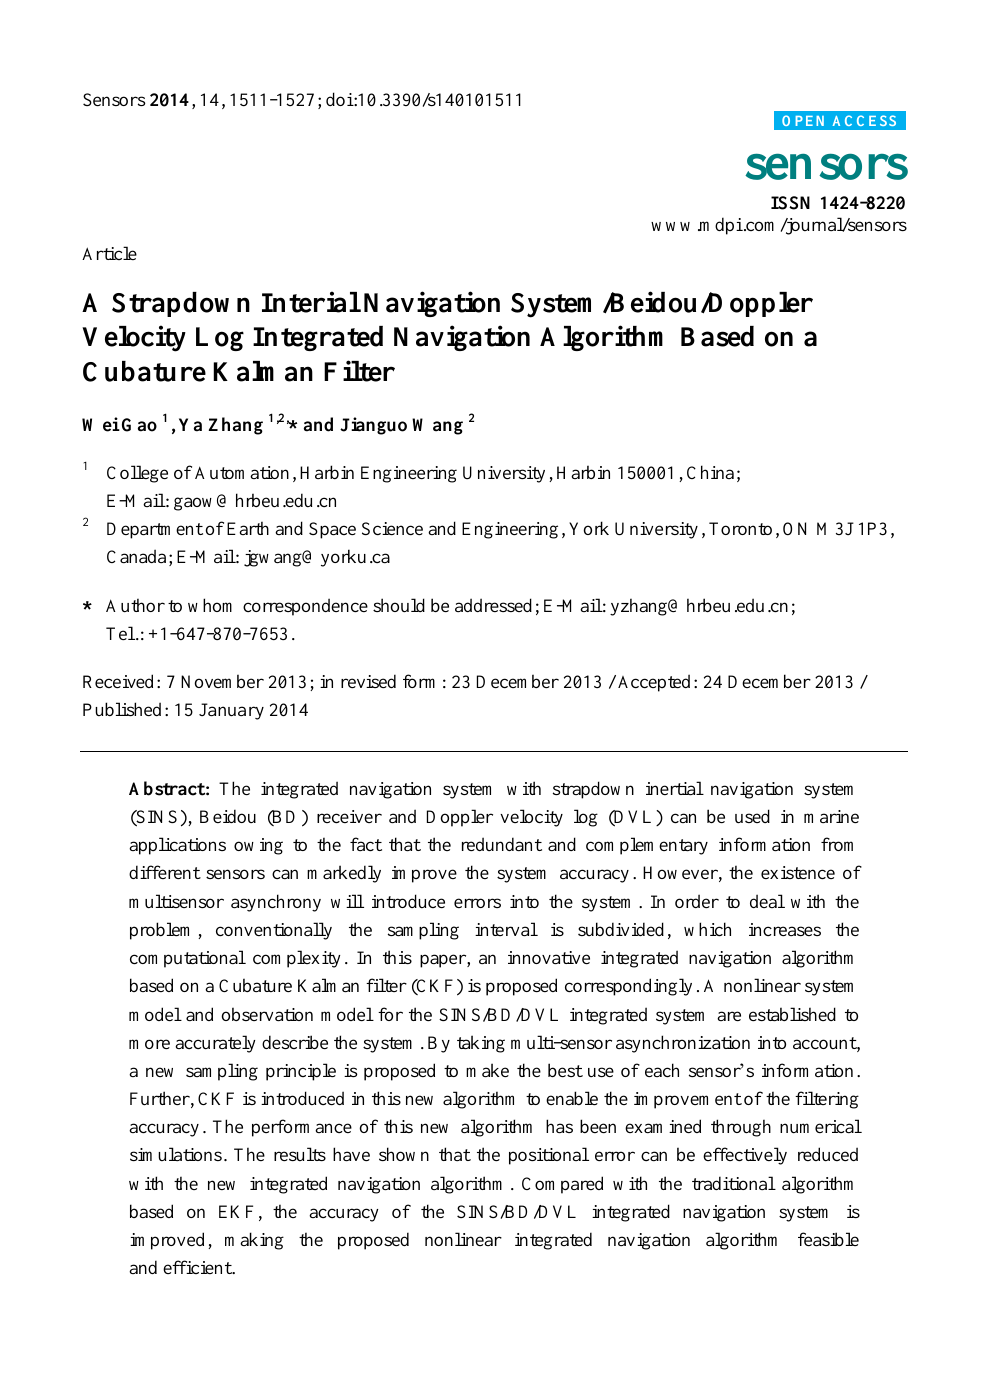 A Strapdown Interial Navigation System Beidou Doppler Velocity Log Integrated Navigation Algorithm Based On A Cubature Kalman Filter Topic Of Research Paper In Mathematics Download Scholarly Article Pdf And Read For Free On